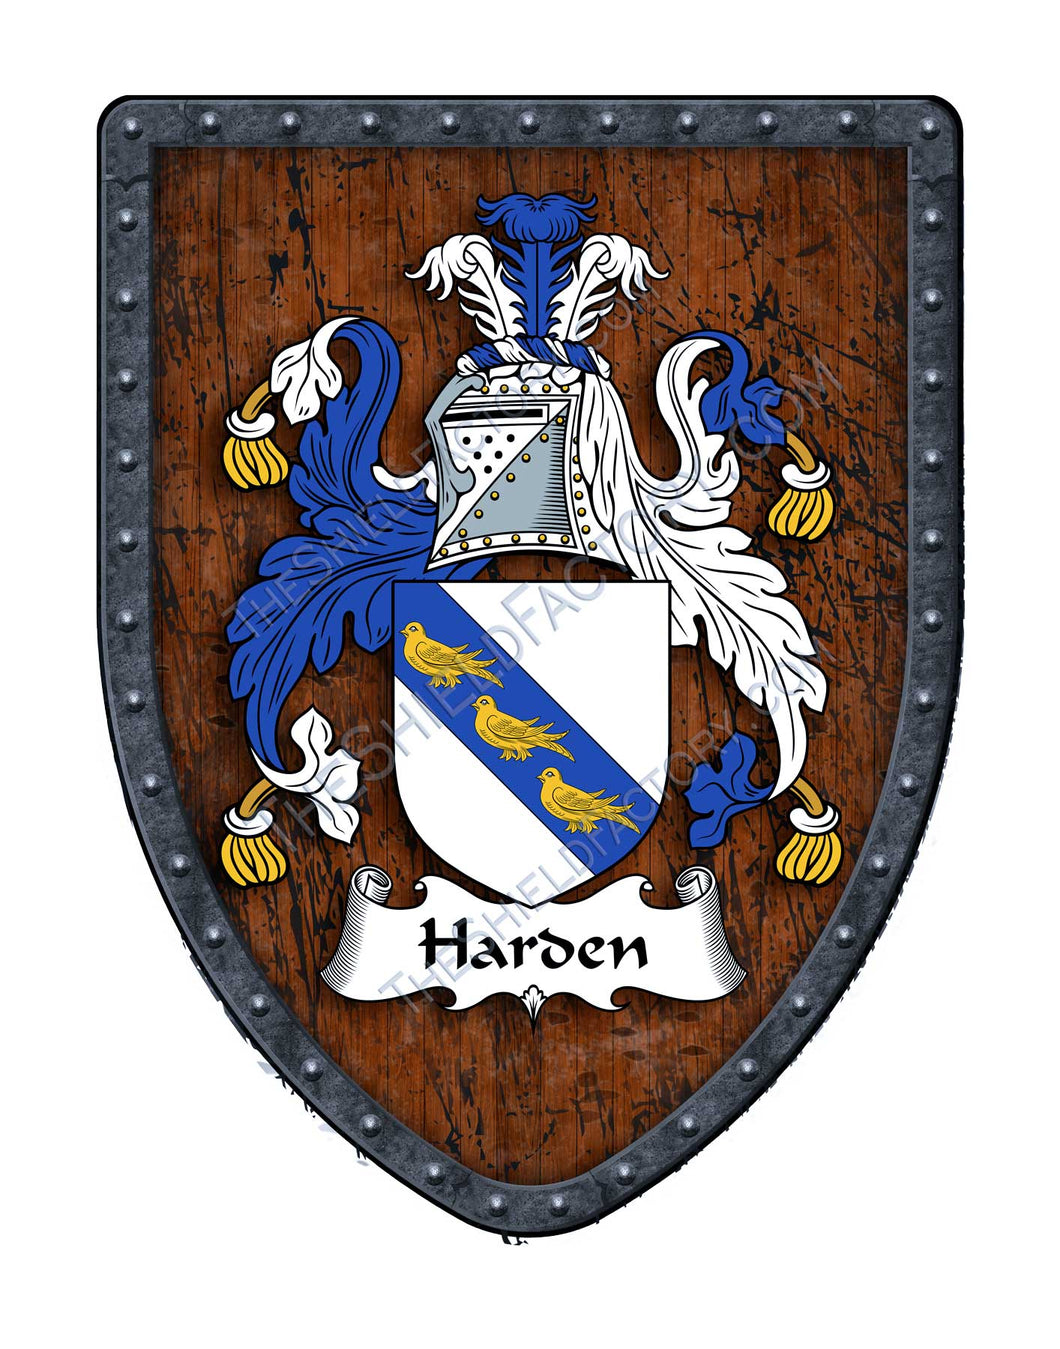 Harden Coat of Arms Shield